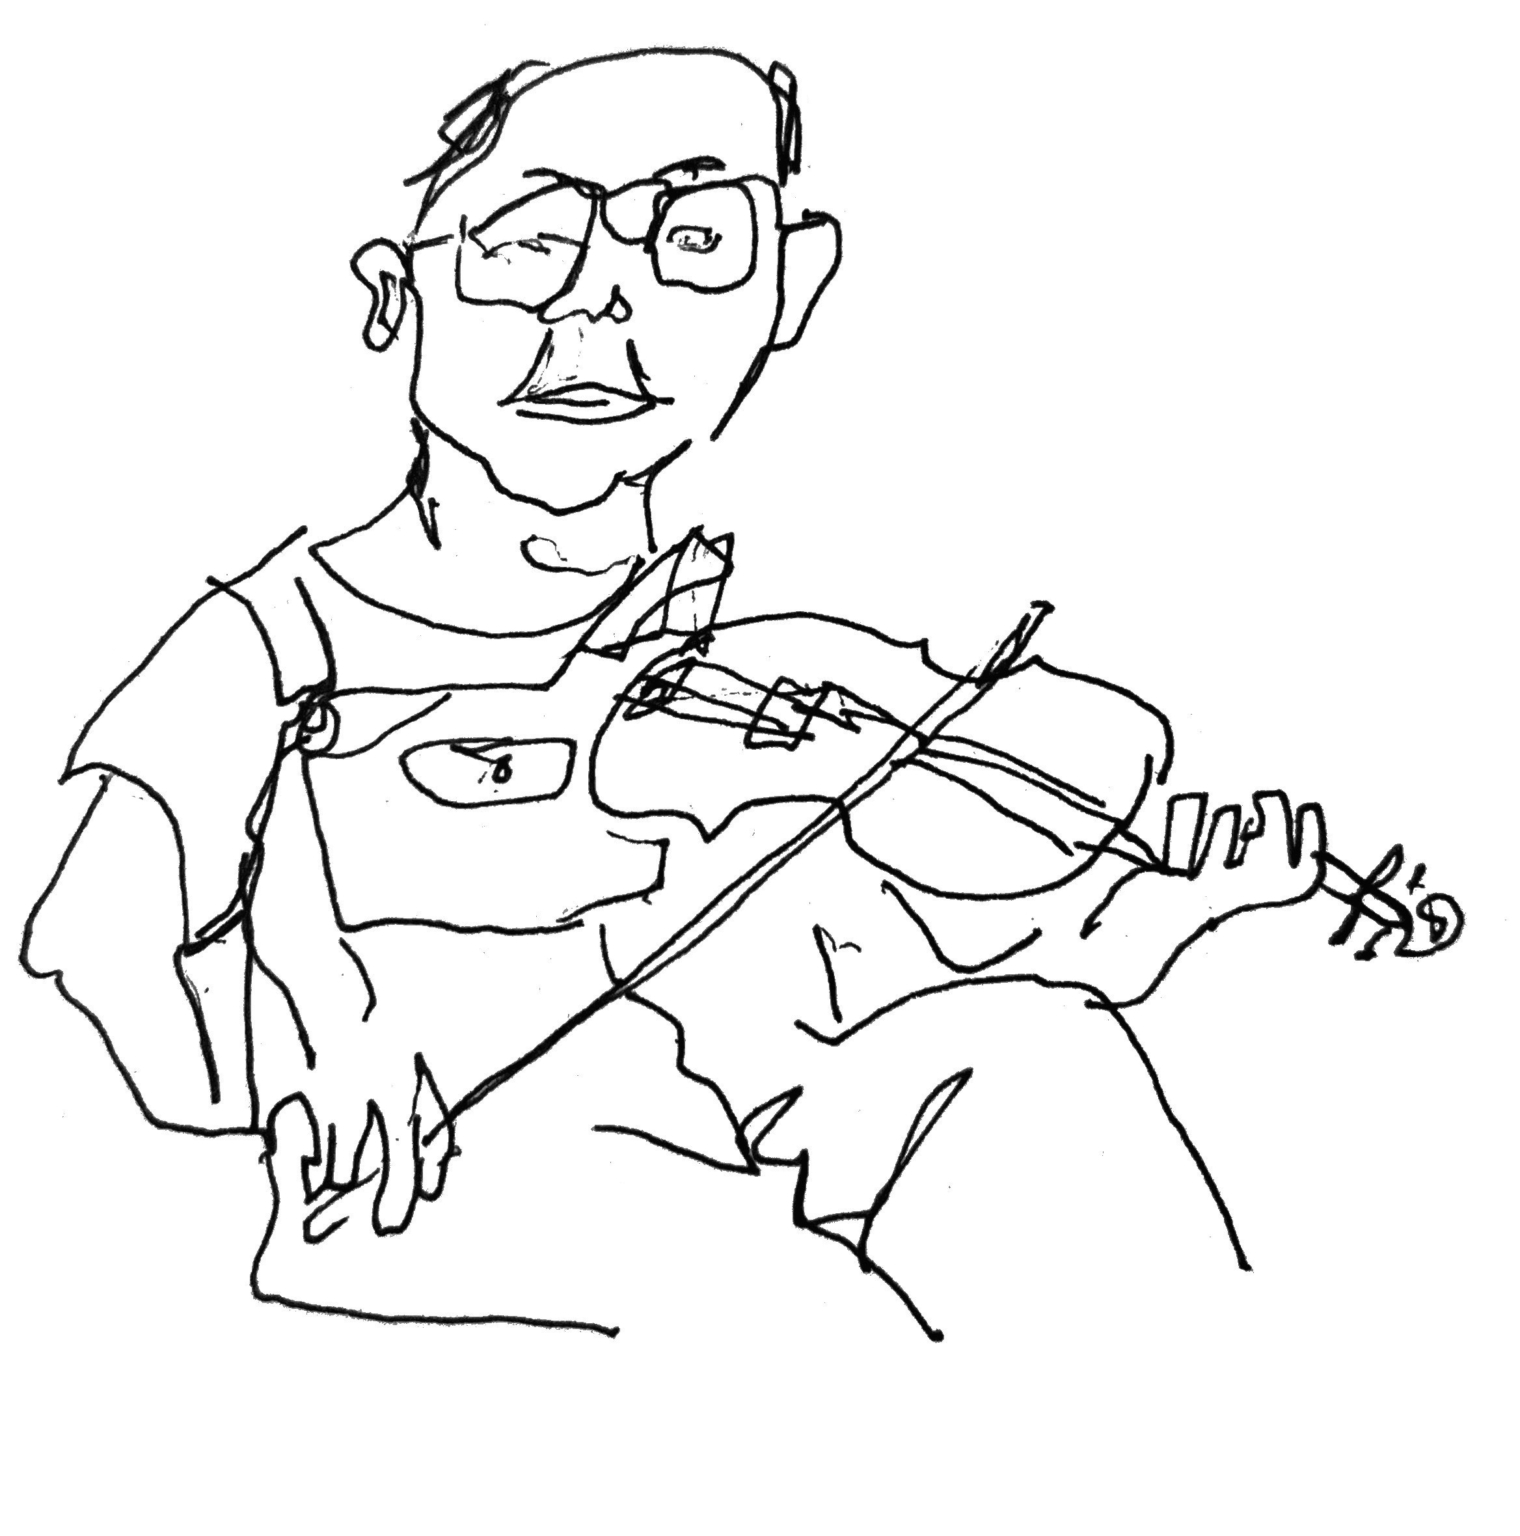 FiddleHed - Online Fiddle and Violin Lessons For Beginners